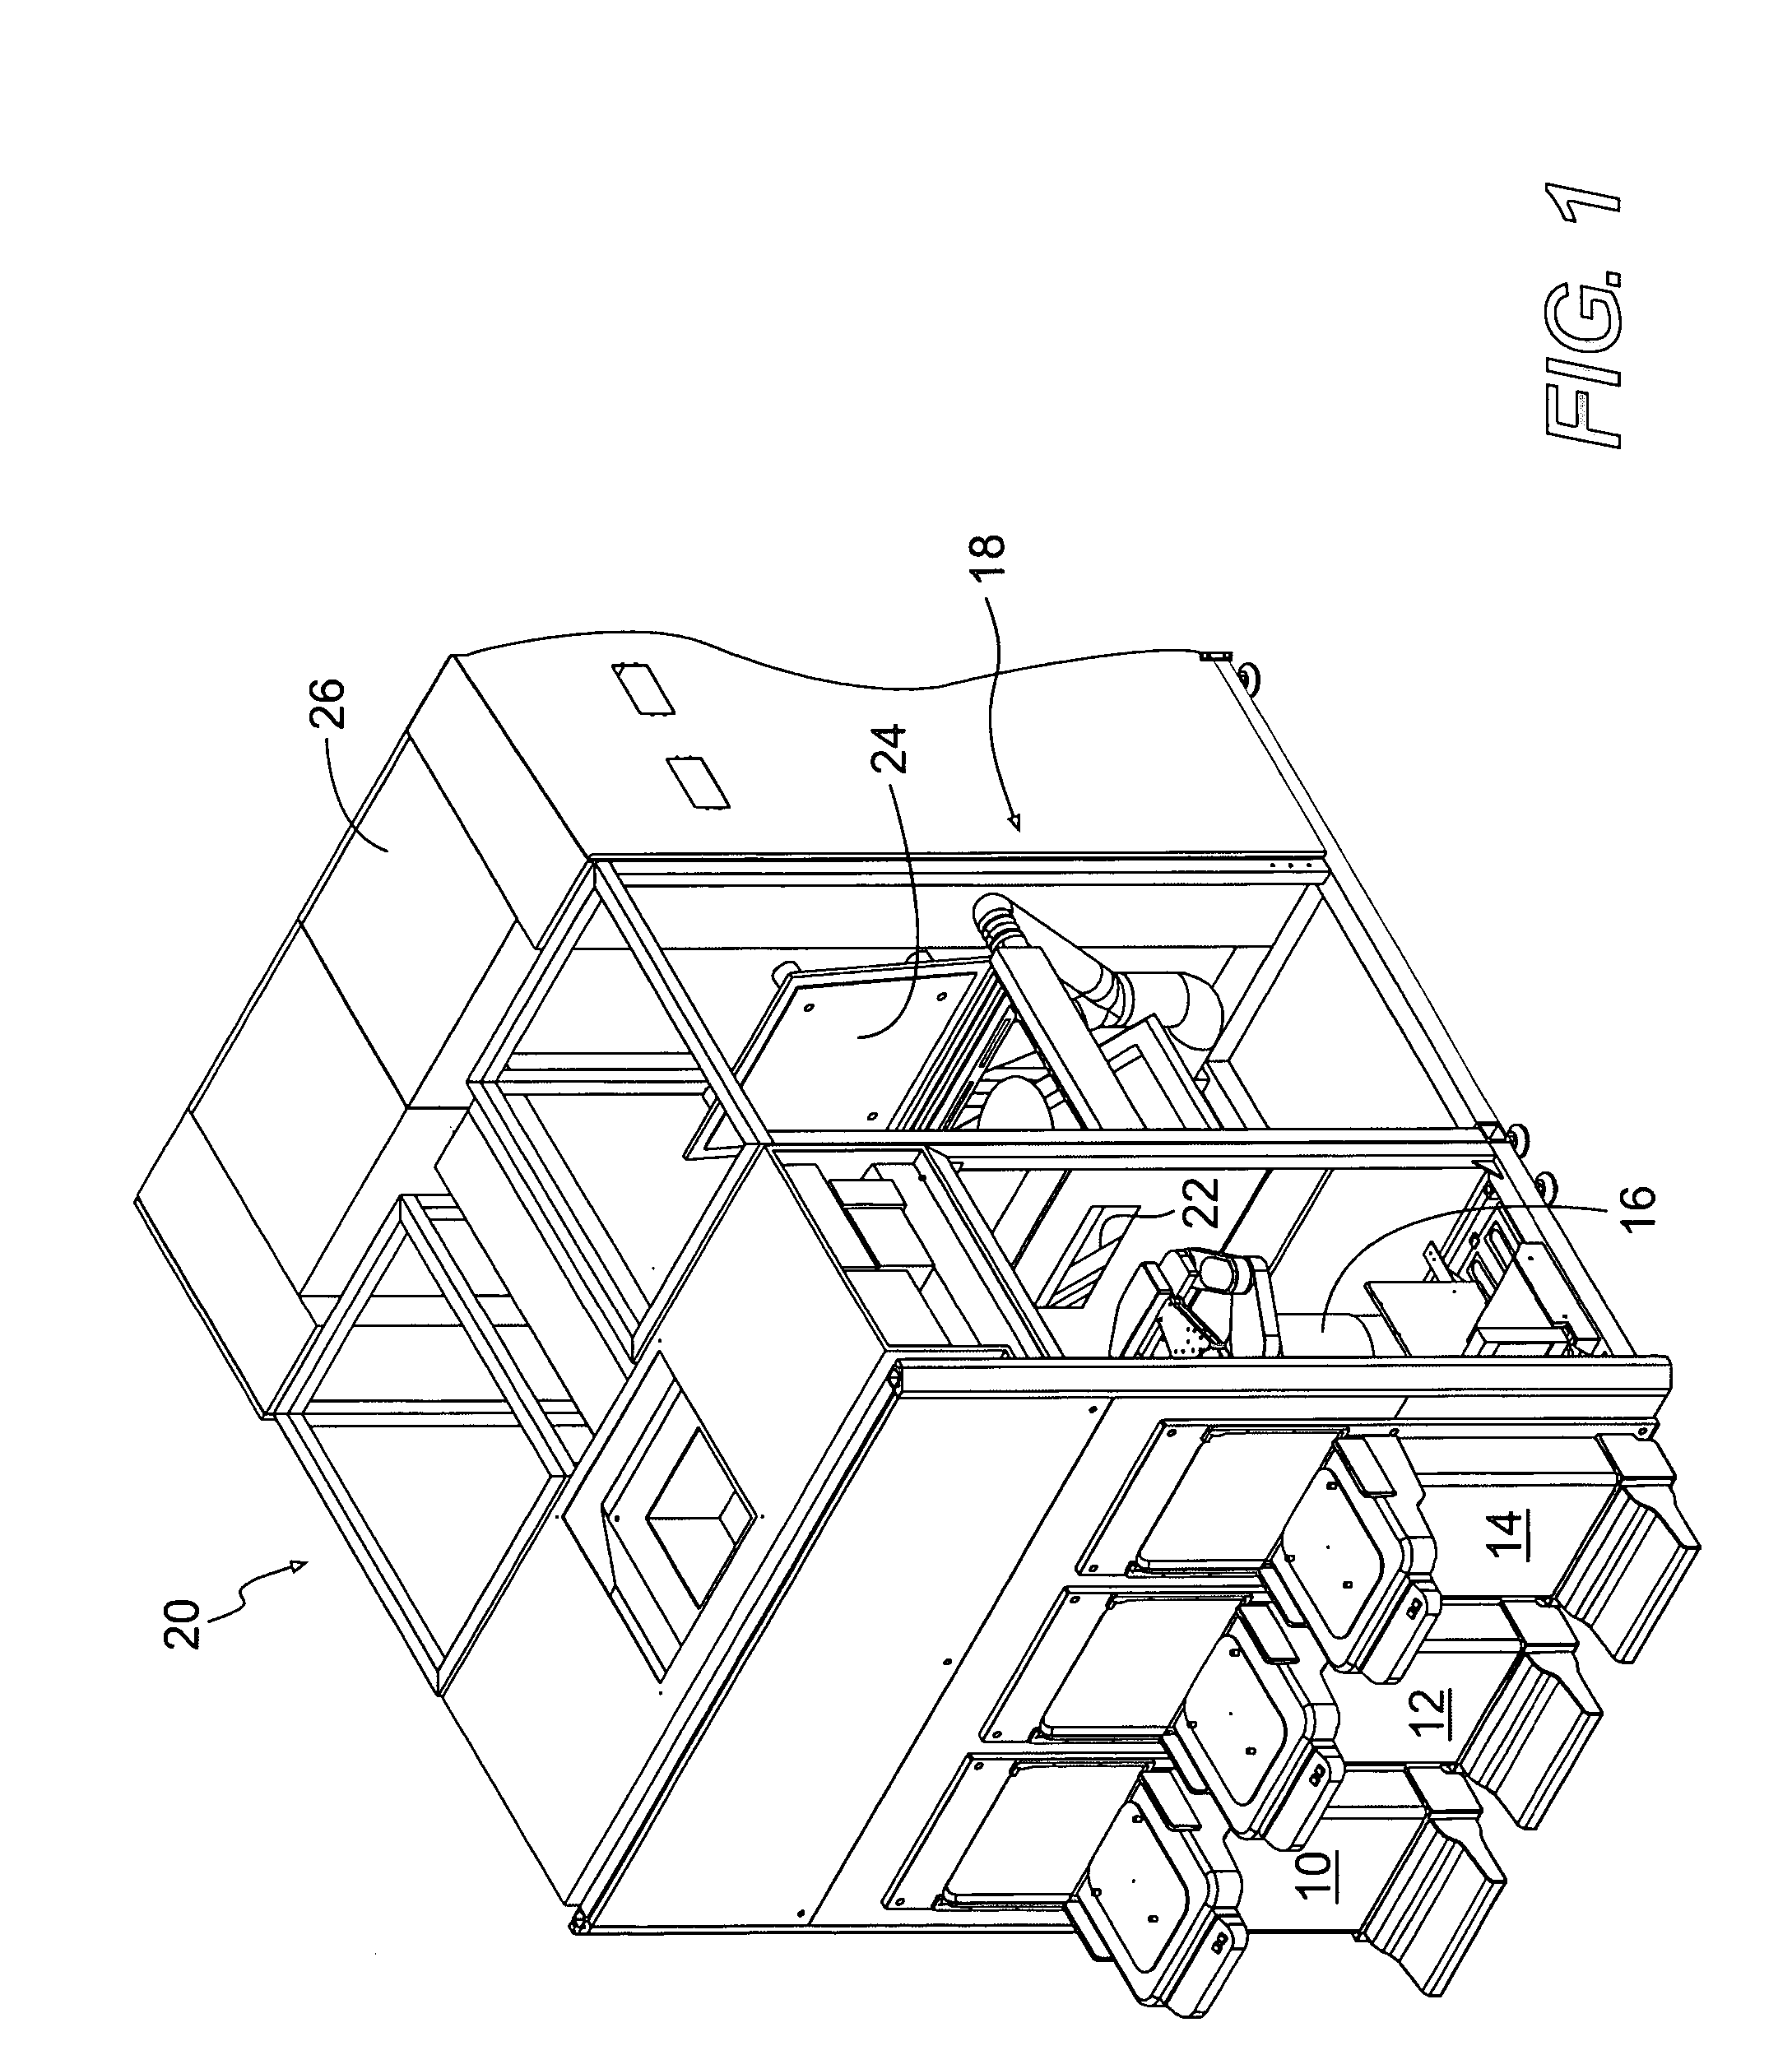 Endeffectors for handling semiconductor wafers